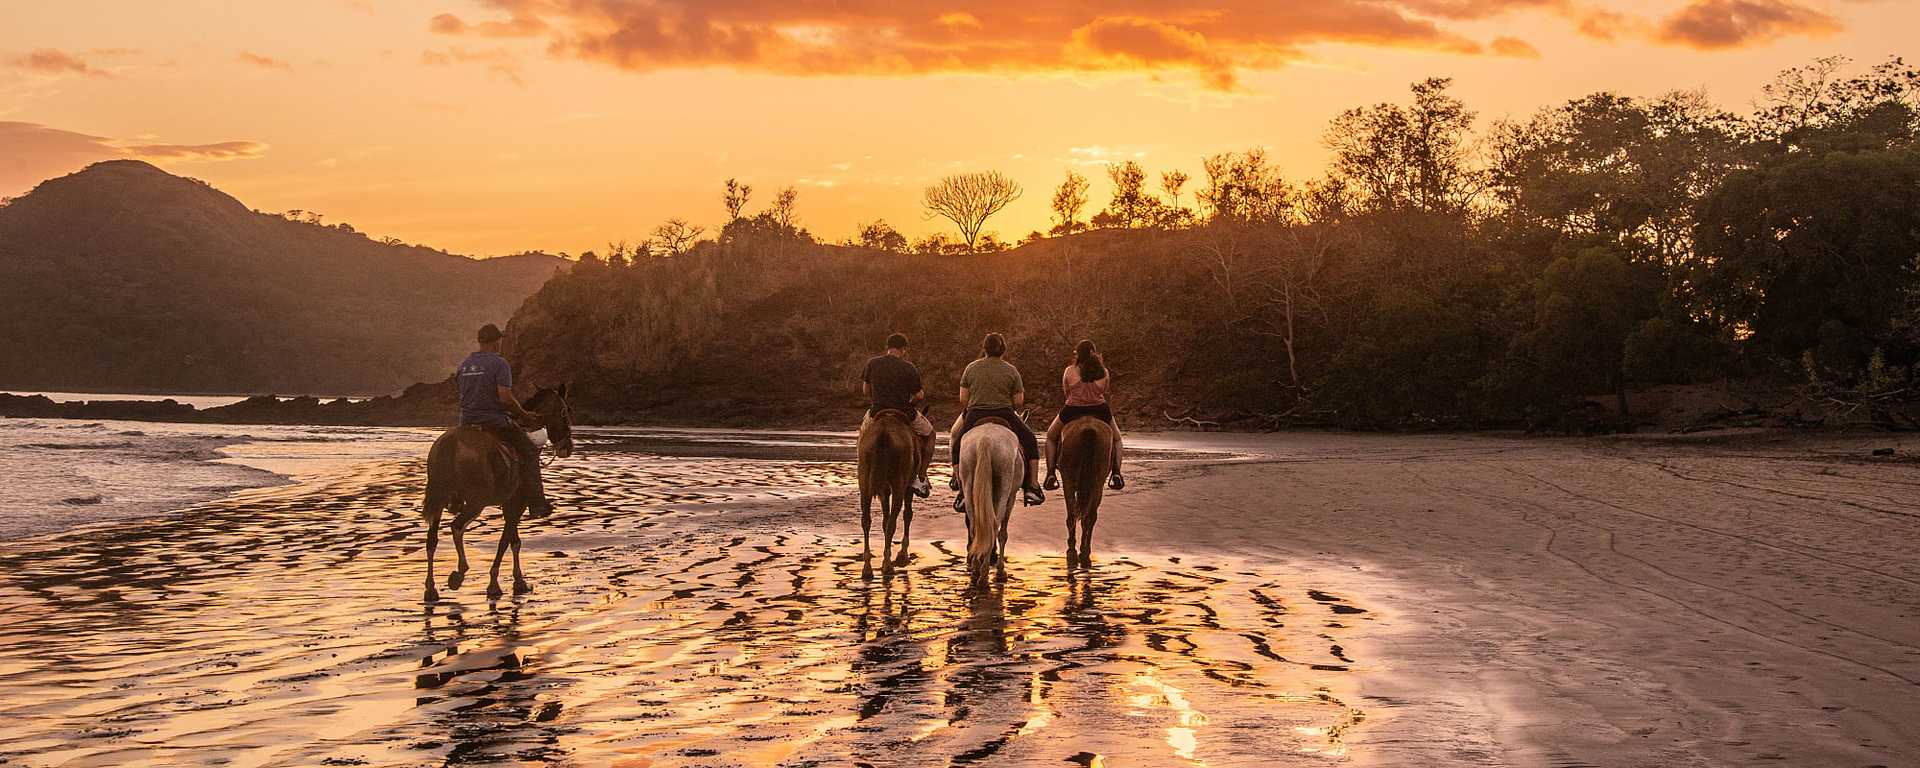 Horsback riding at Playa Conchal in Guanacaste, Costa Rica